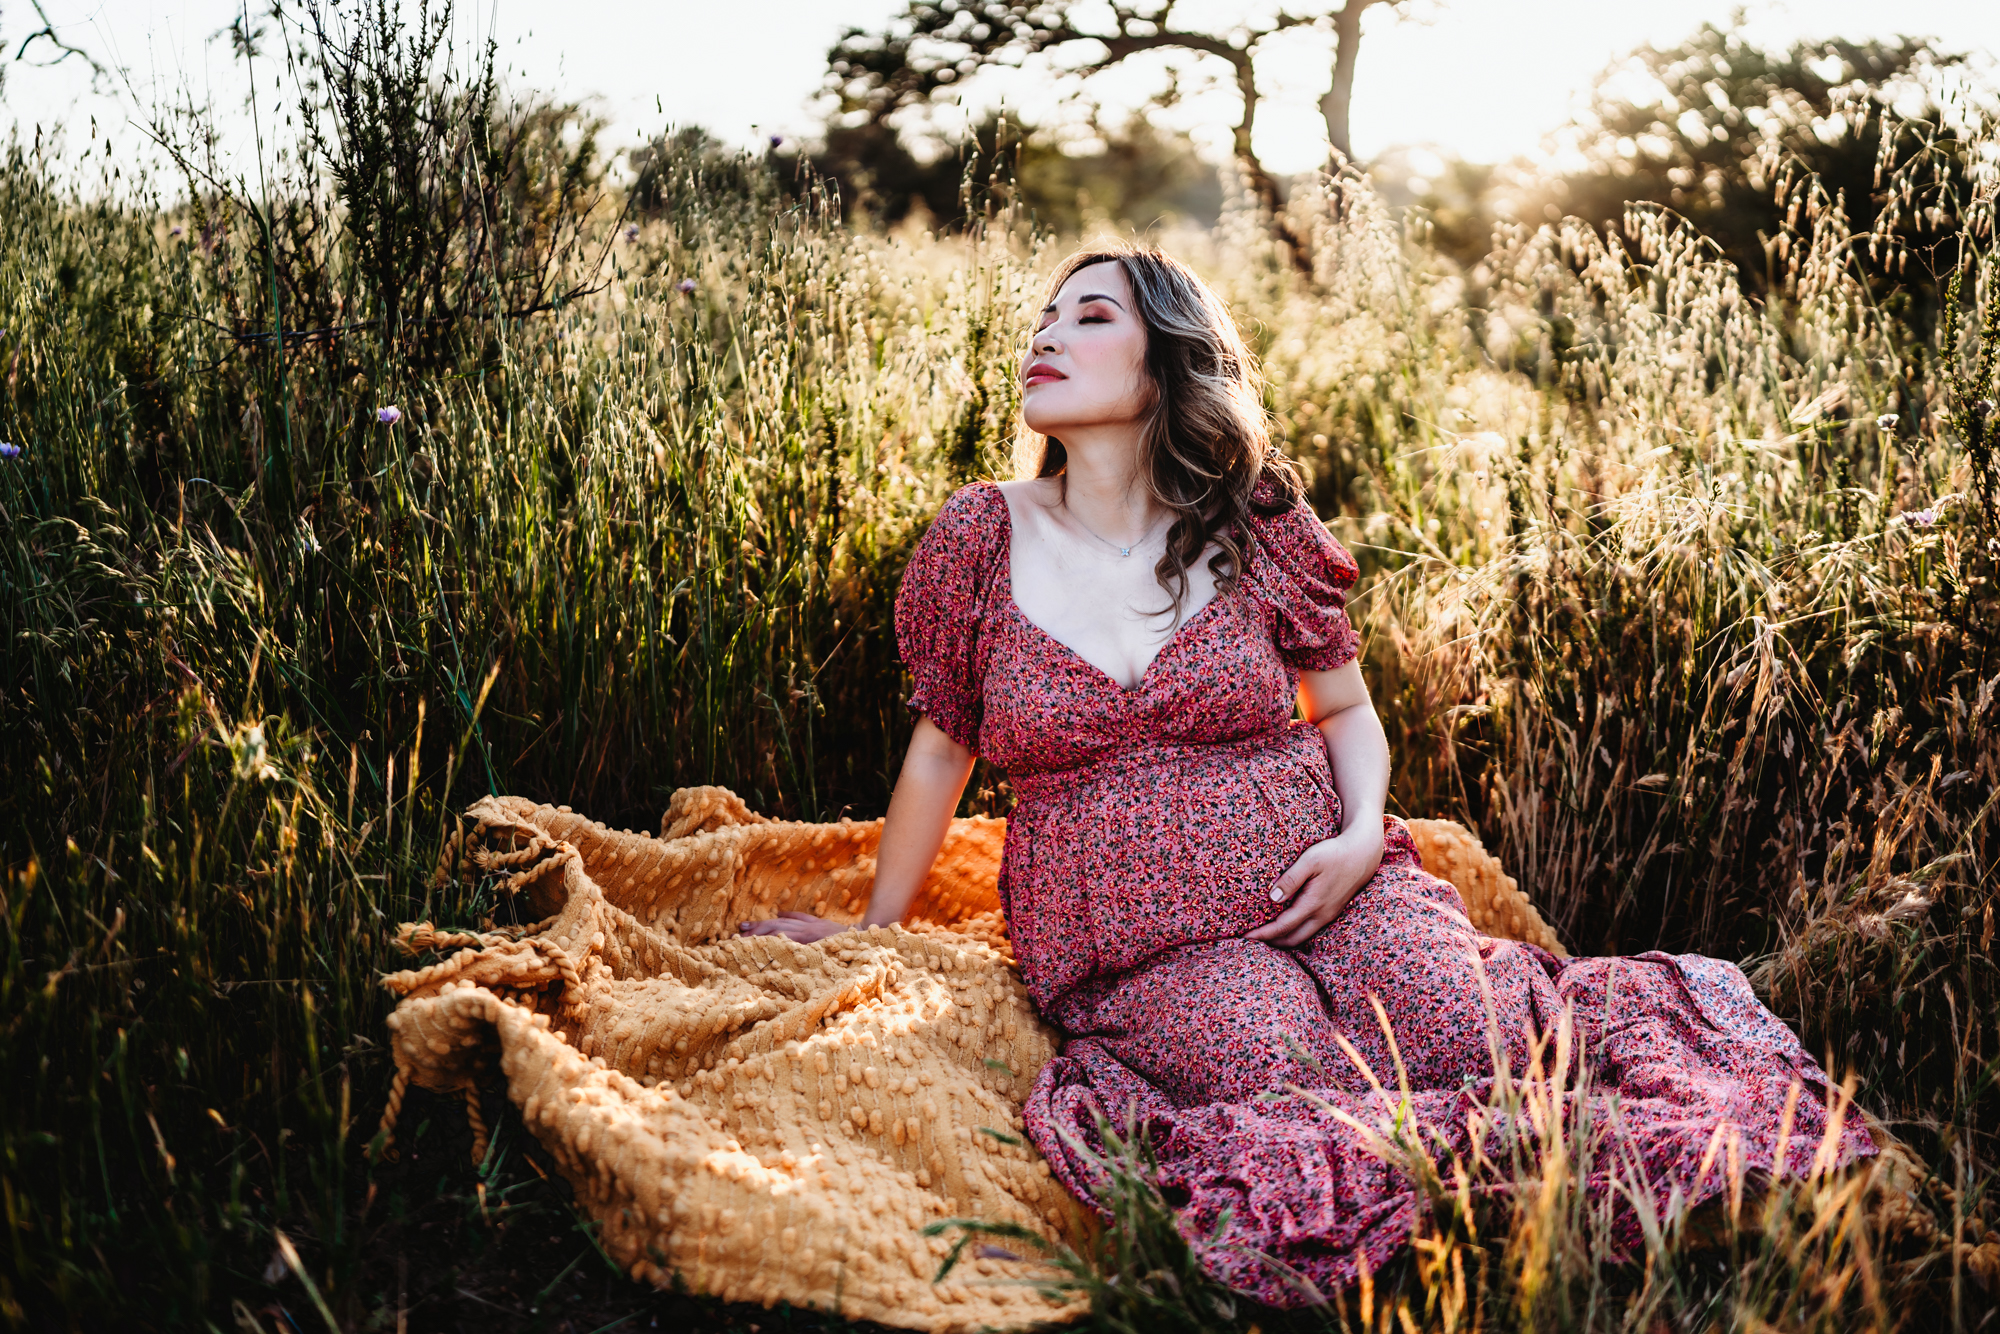 A pregnant woman wearing a pink dress and sitting on a yellow blanket in long grass holds her belly and lifts her face to the sun. This is during a San Diego lifestyle maternity photo session by Love Michelle Photography.